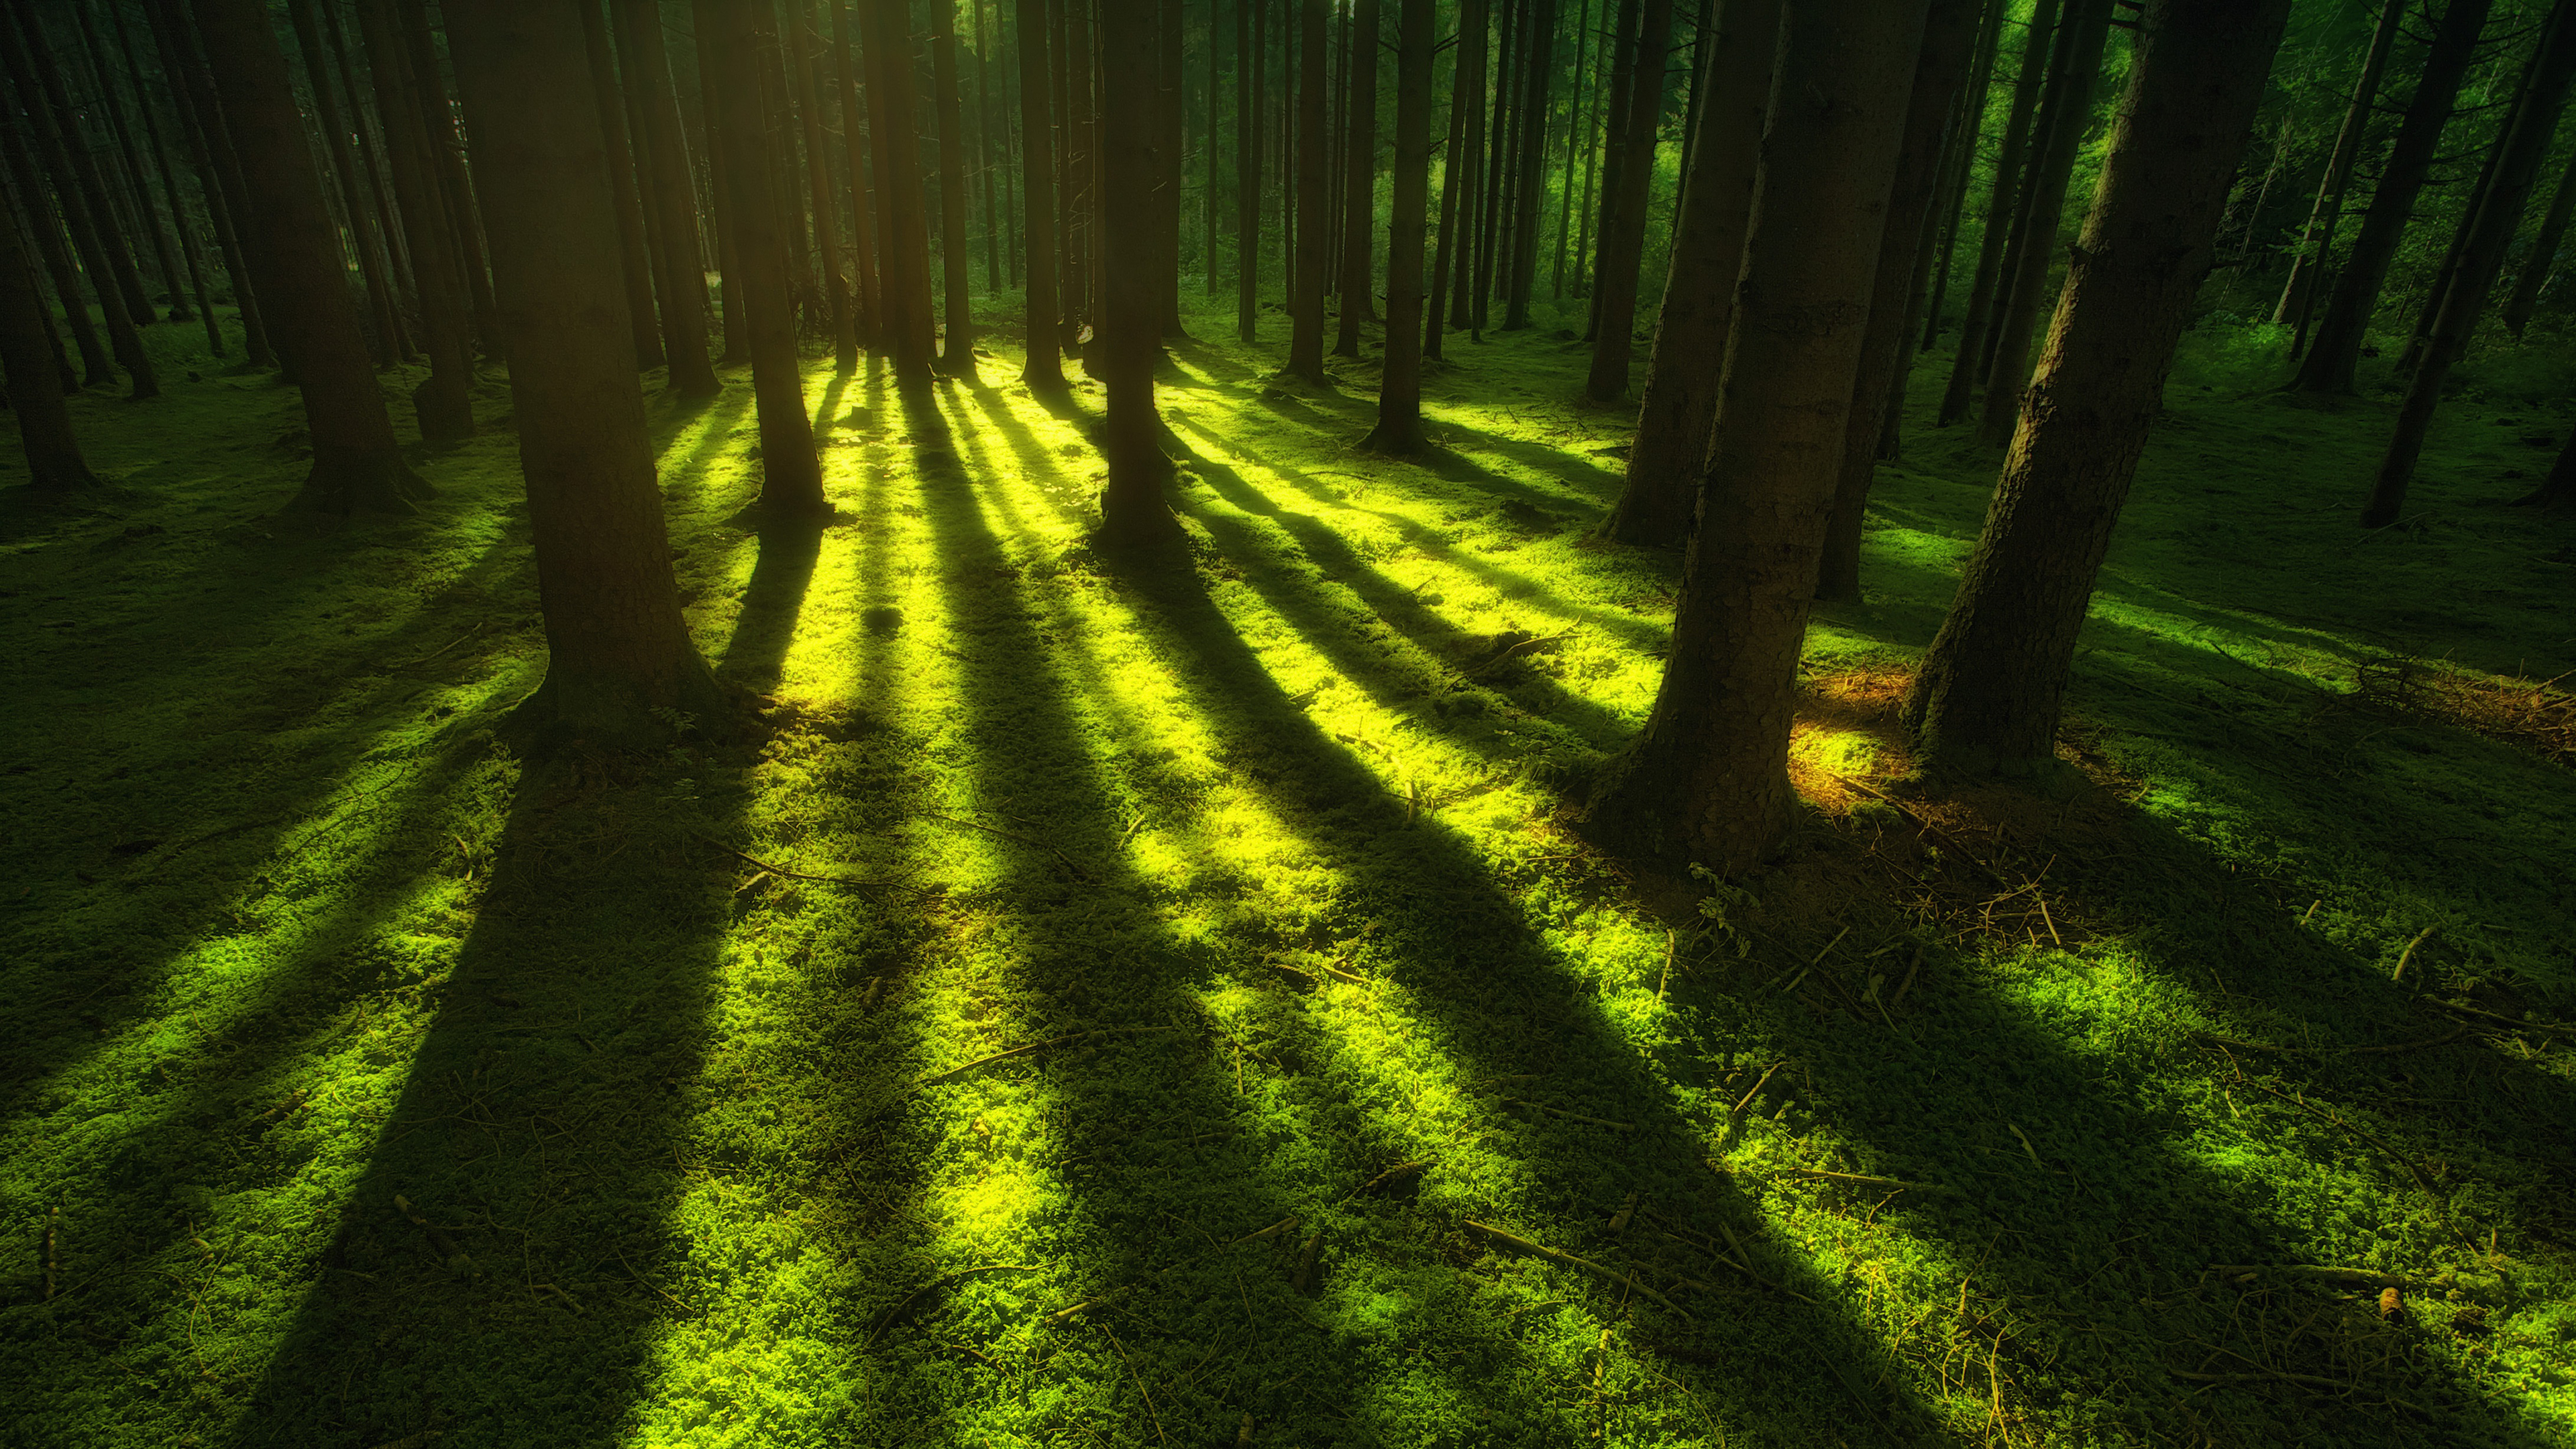 General 3840x2160 forest trees nature sun rays low light natural light shadow pine trees green moss